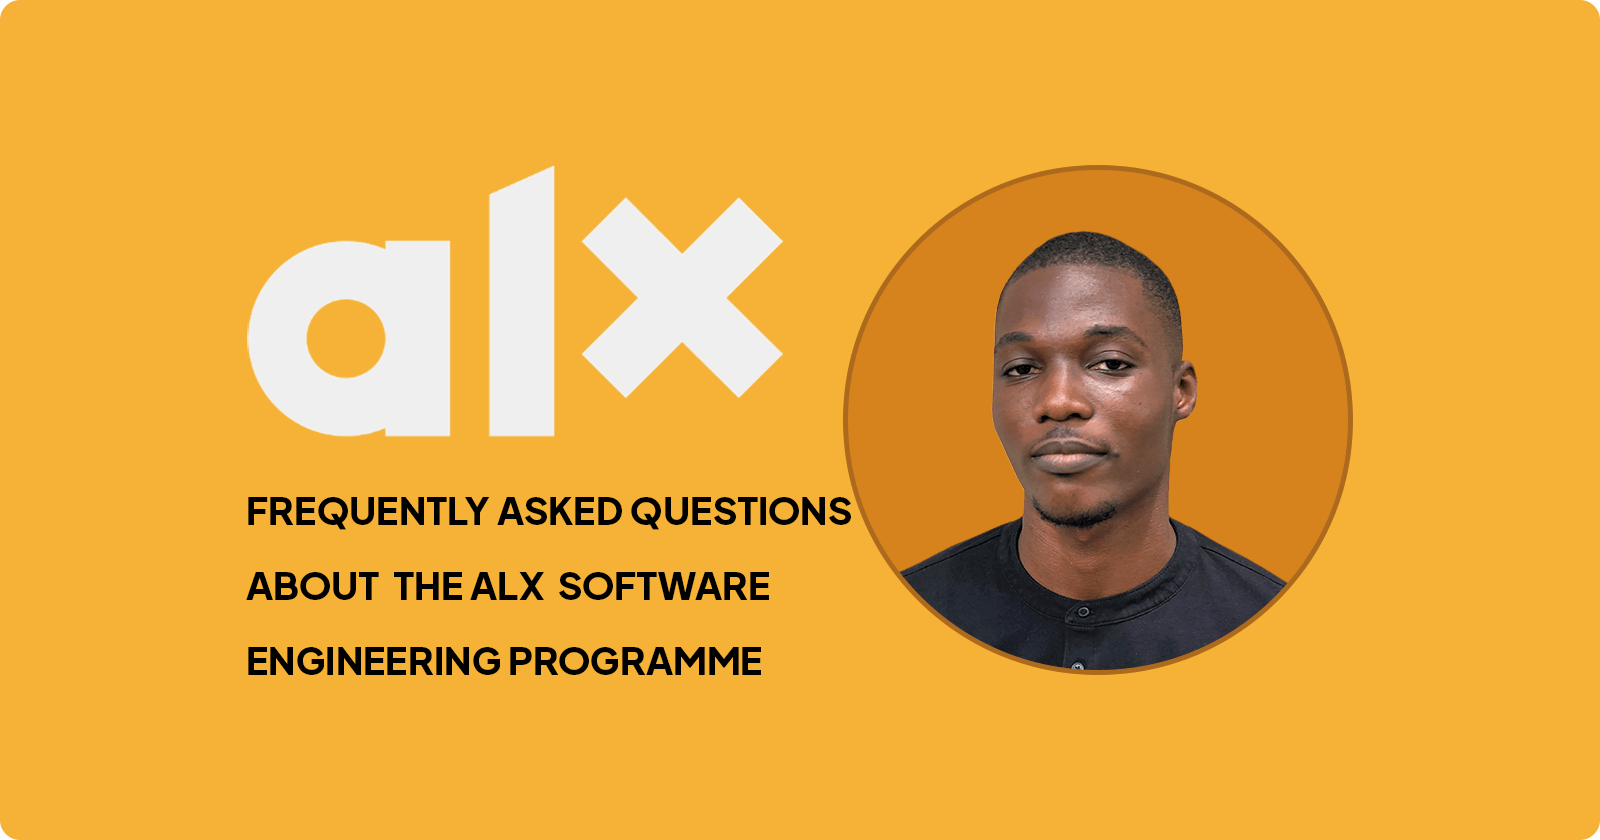 Frequently Asked Questions about the ALX Software Engineering Programme